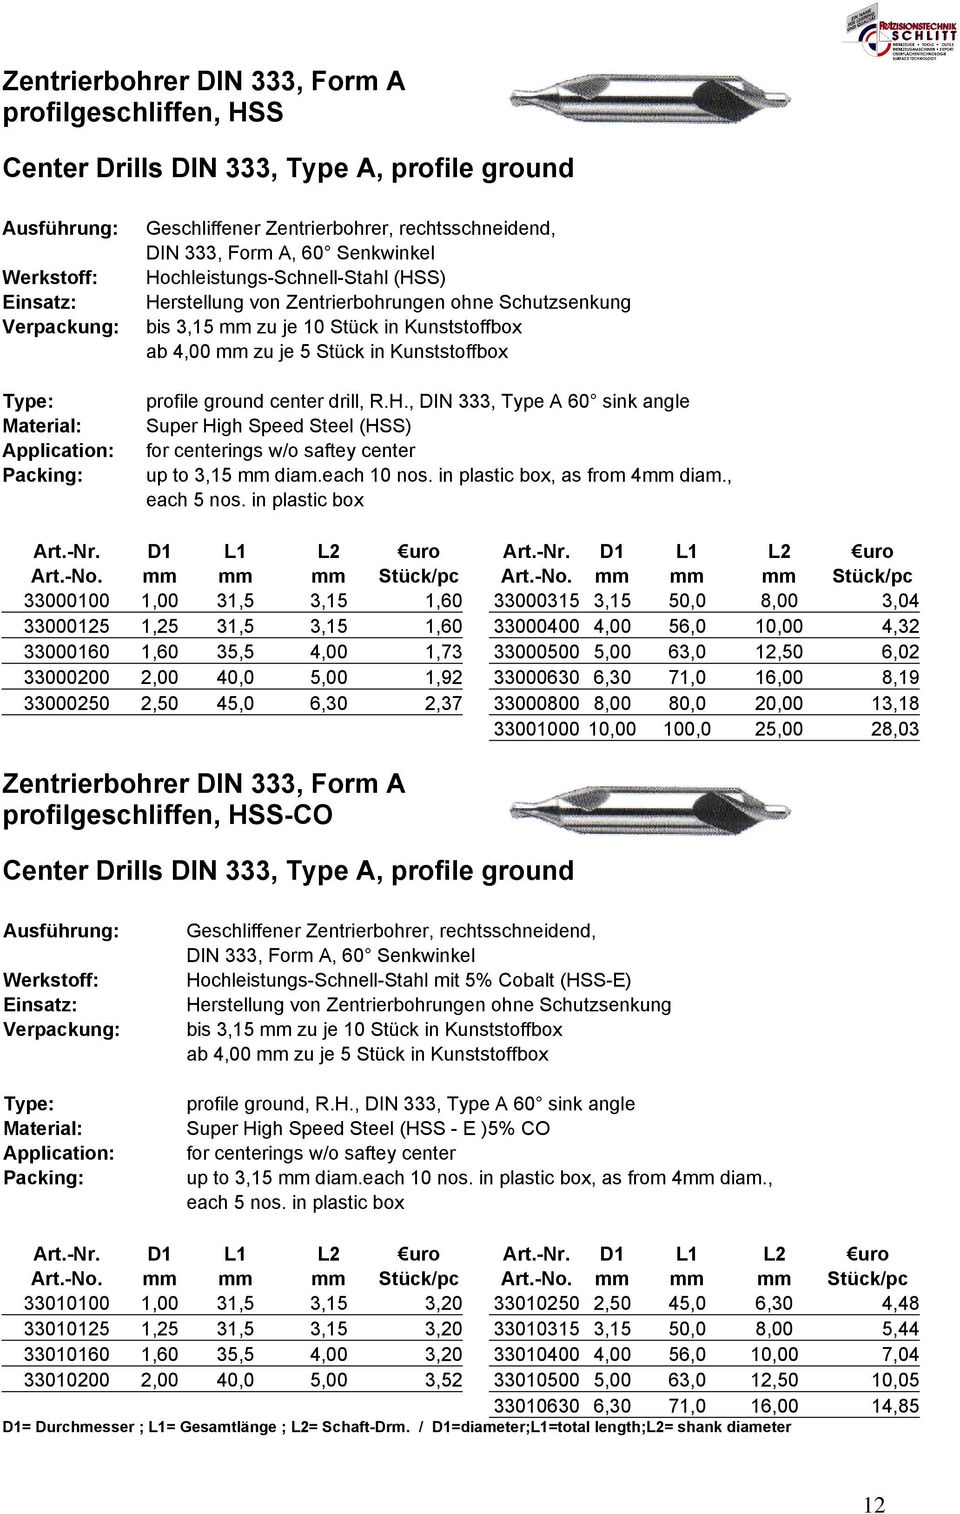 4,00 mm zu je 5 Stück in Kunststoffbox profile ground center drill, R.H., DIN 333, Type A 60 sink angle Super High Speed Steel (HSS) for centerings w/o saftey center up to 3,15 mm diam.each 10 nos.